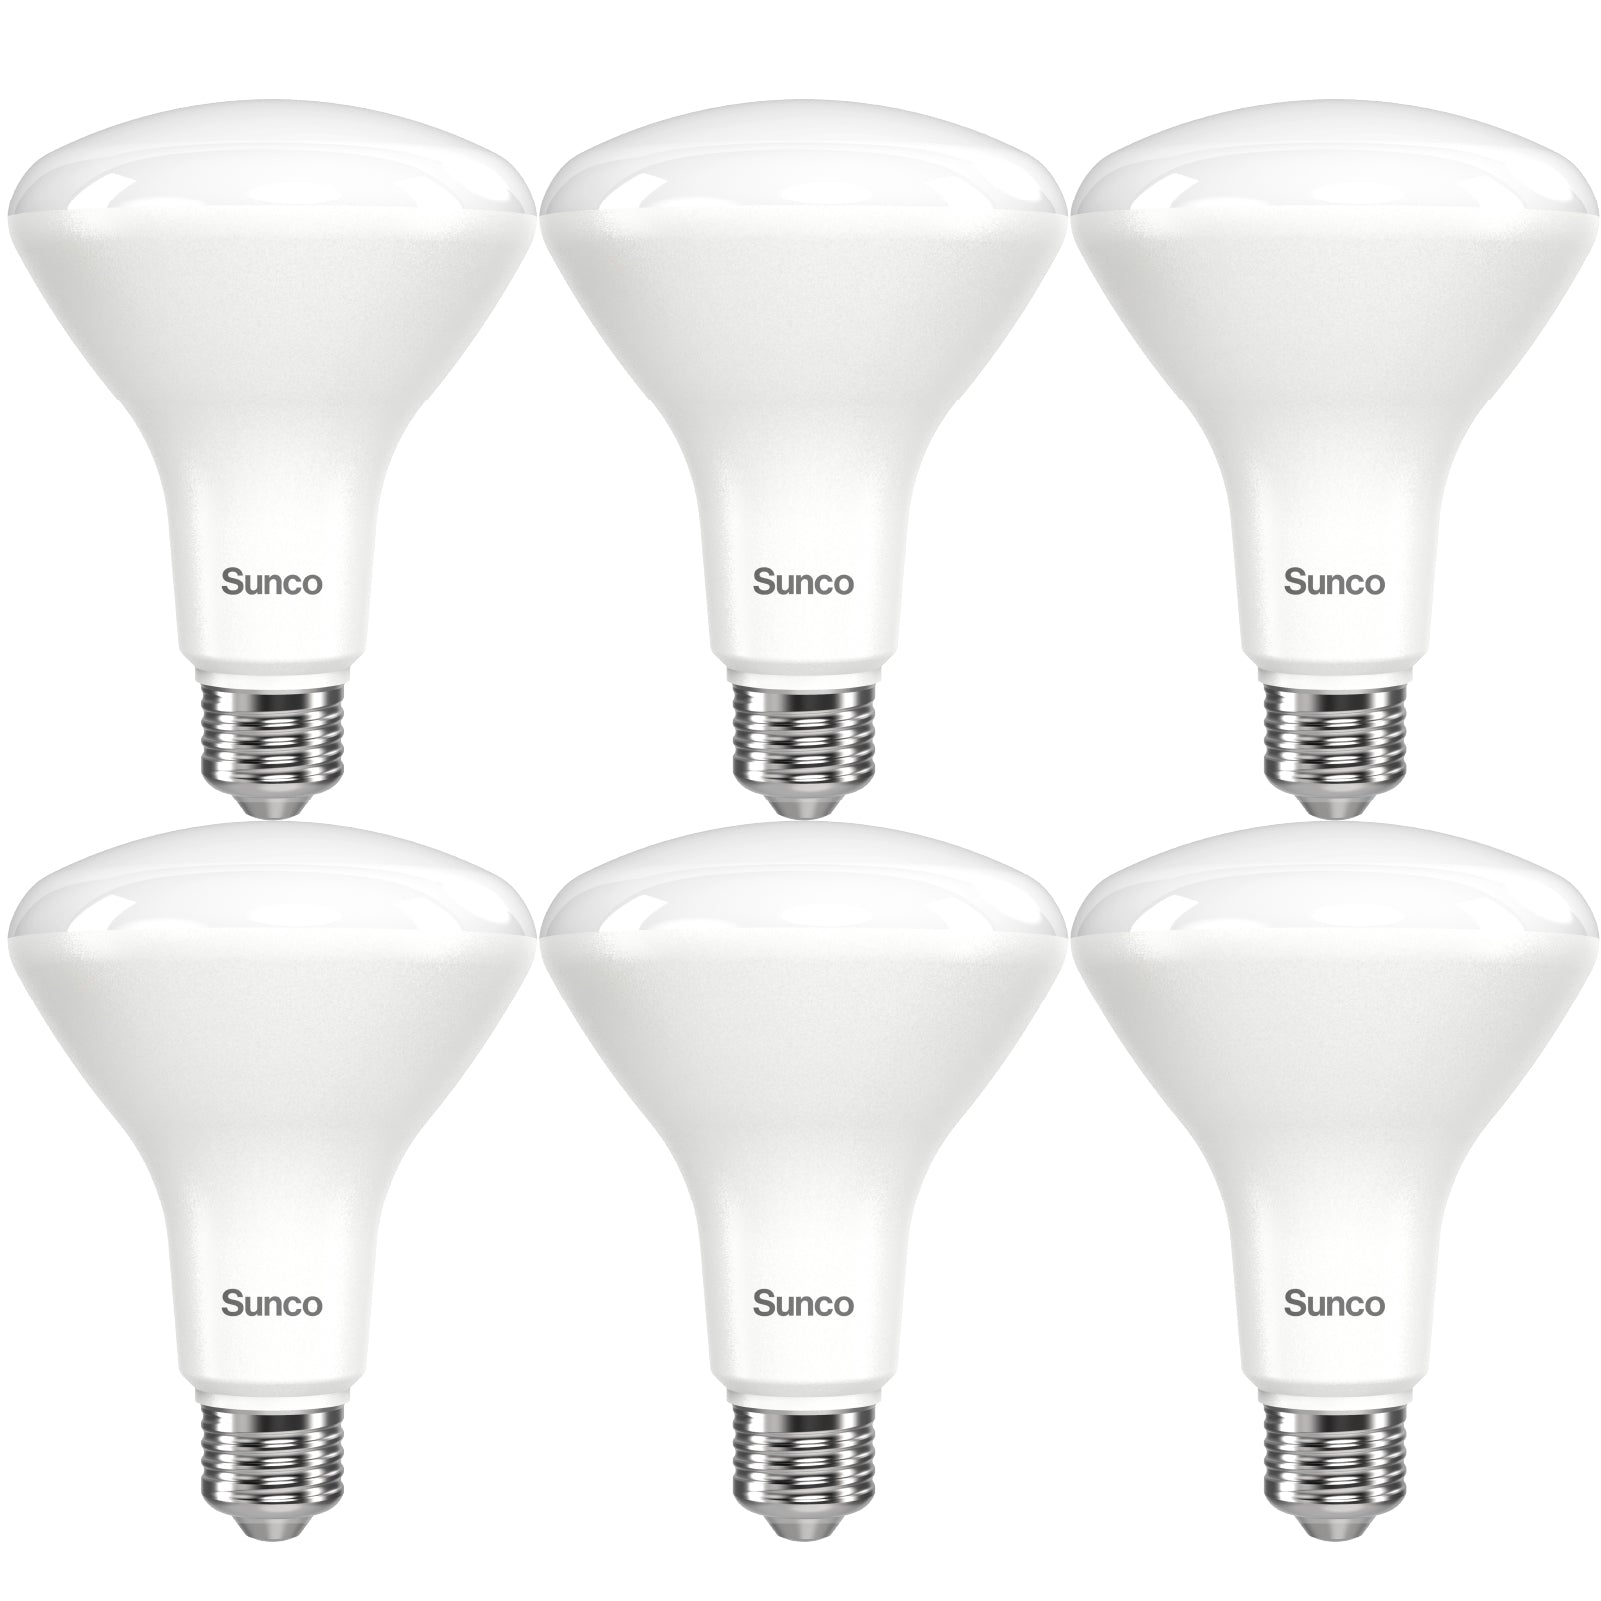 Optimal brightness is the way to go. BR30 Light Bulbs feature long-lasting LEDs that use less power.